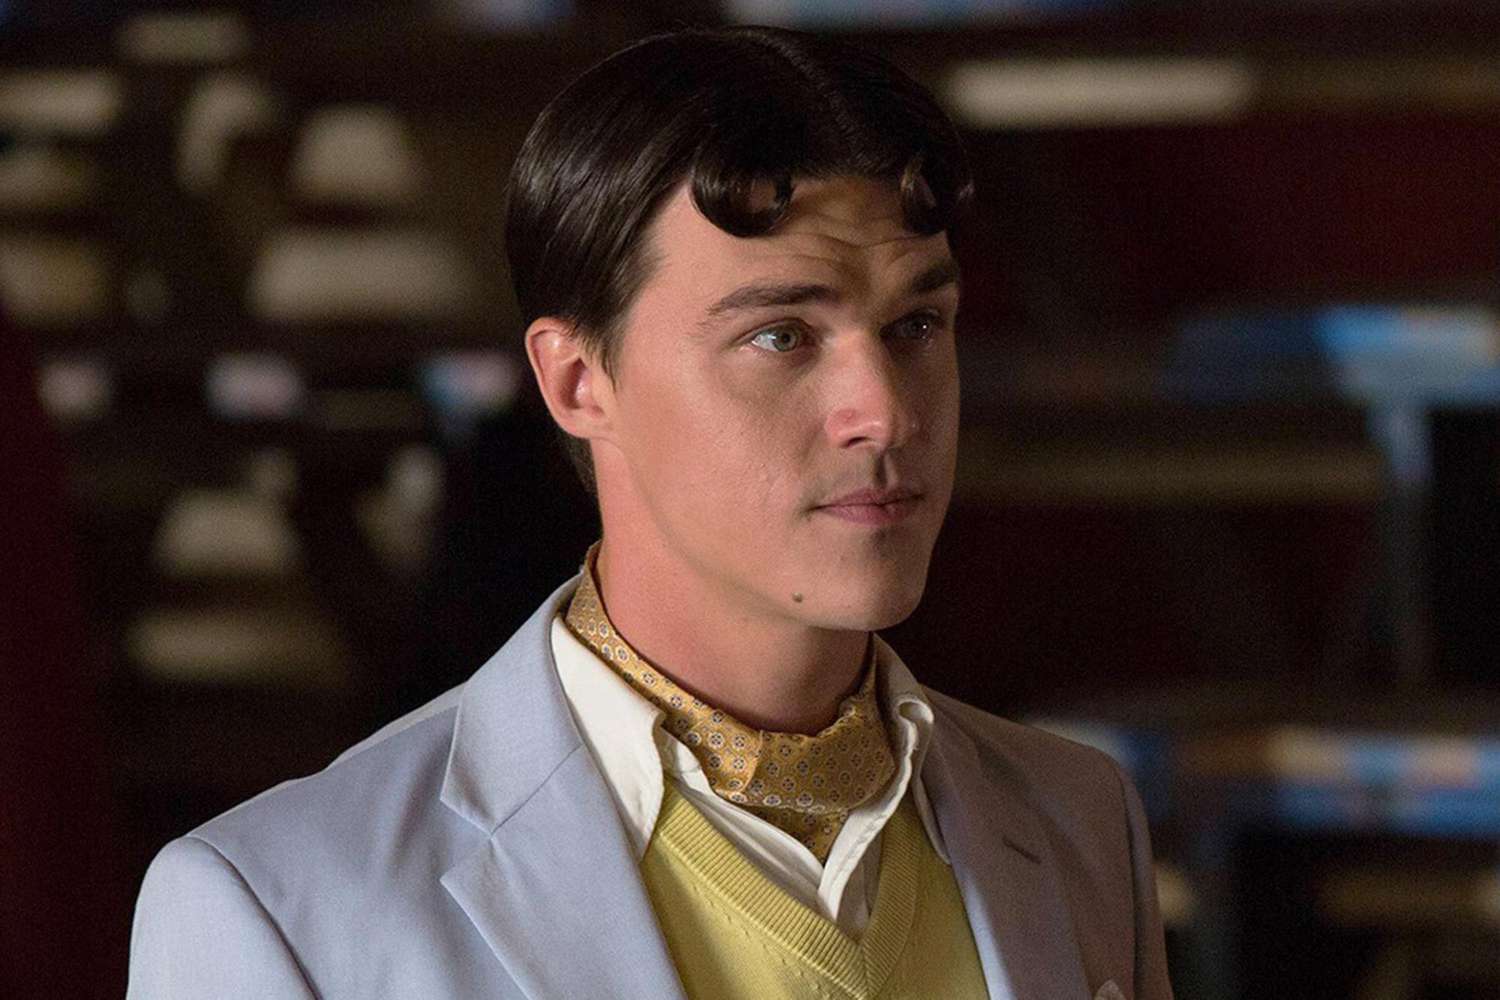 Finn Wittrock says American Horror Story season 10 is 'different in tone' than past seasons